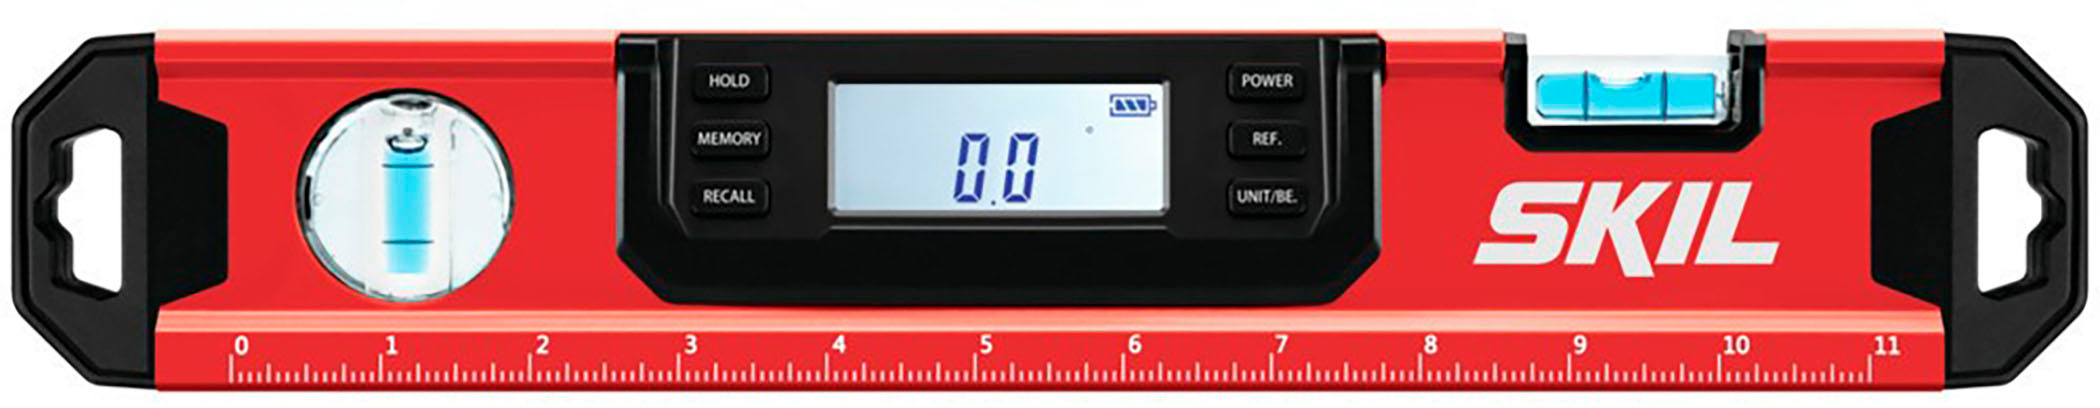 Angle View: Skil - 12-In Digital Level - Red/Black